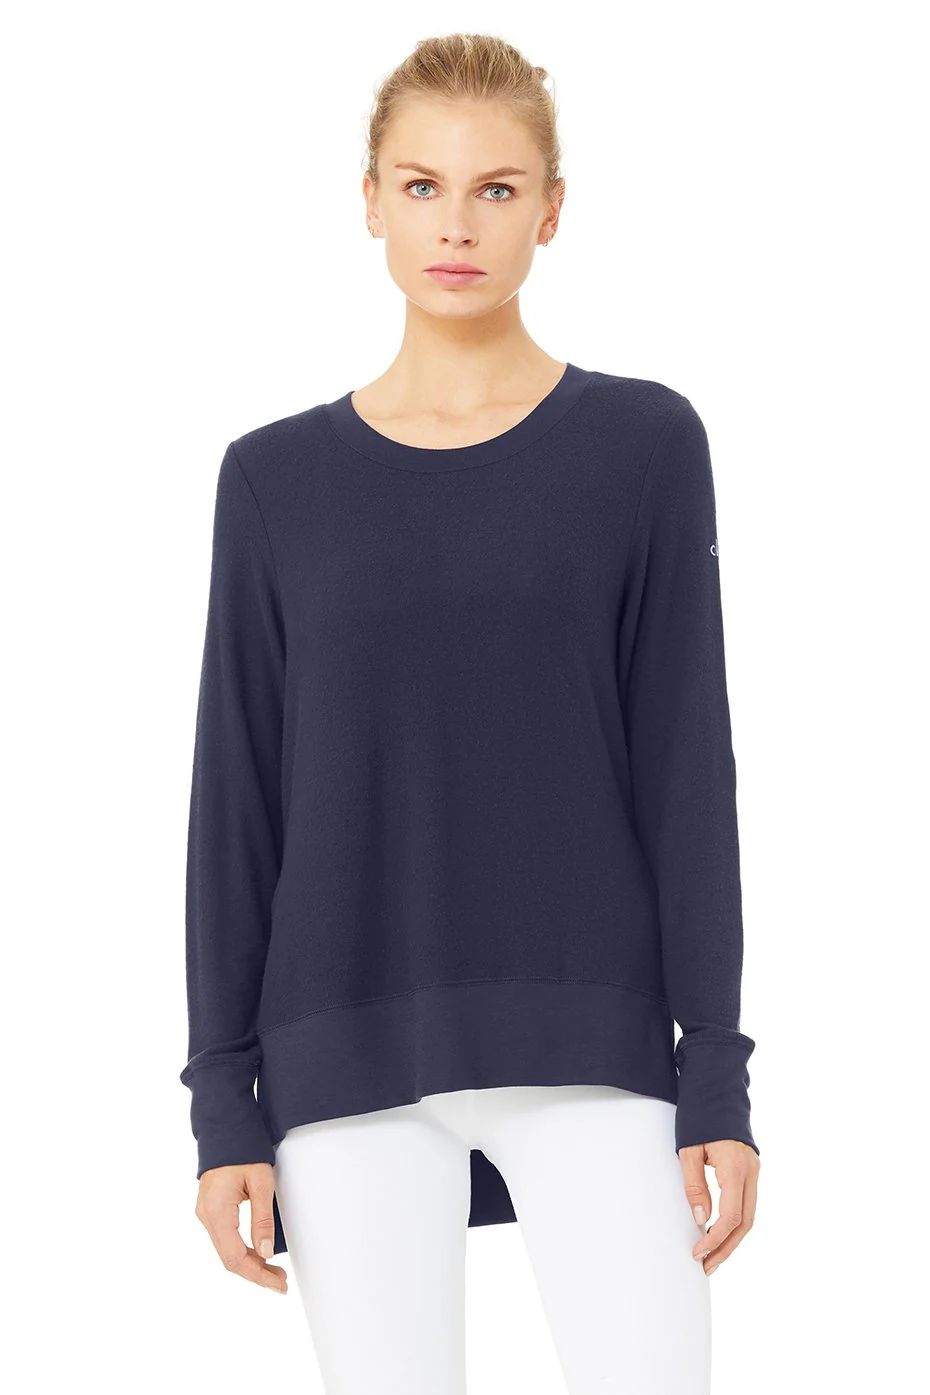 Alo YogaÂ® | Glimpse Long Sleeve Top in Rich Navy, Size: XS | Alo Yoga